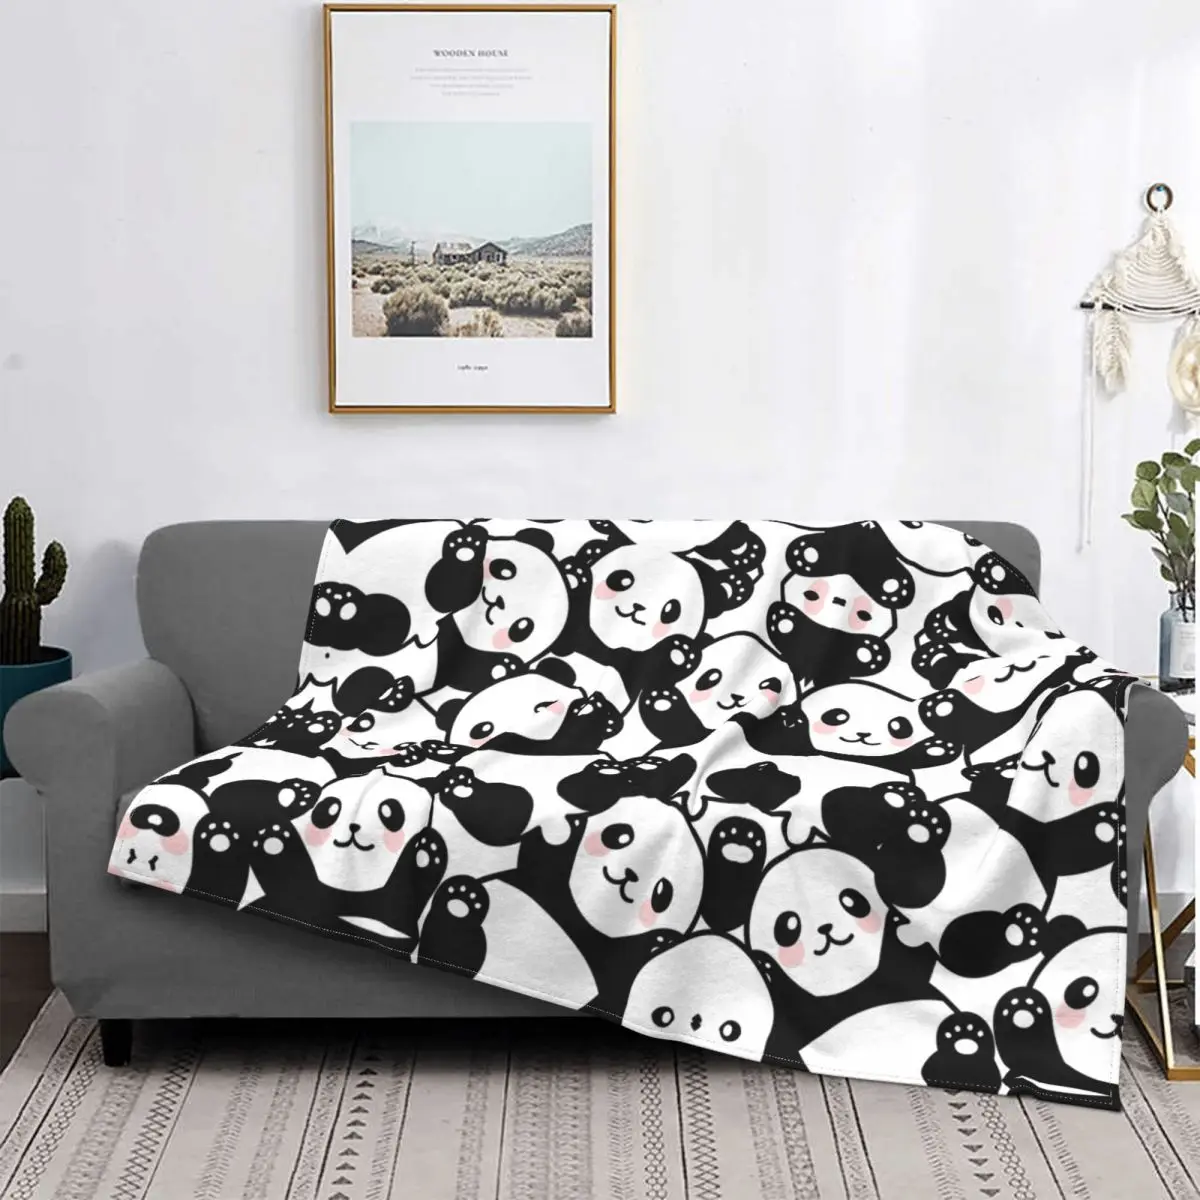 

Blanket Warm Fleece Soft Flannel Loverly Funny Throw Blankets for Bedroom Couch Office Spring Autumn Cute Sushi Panda